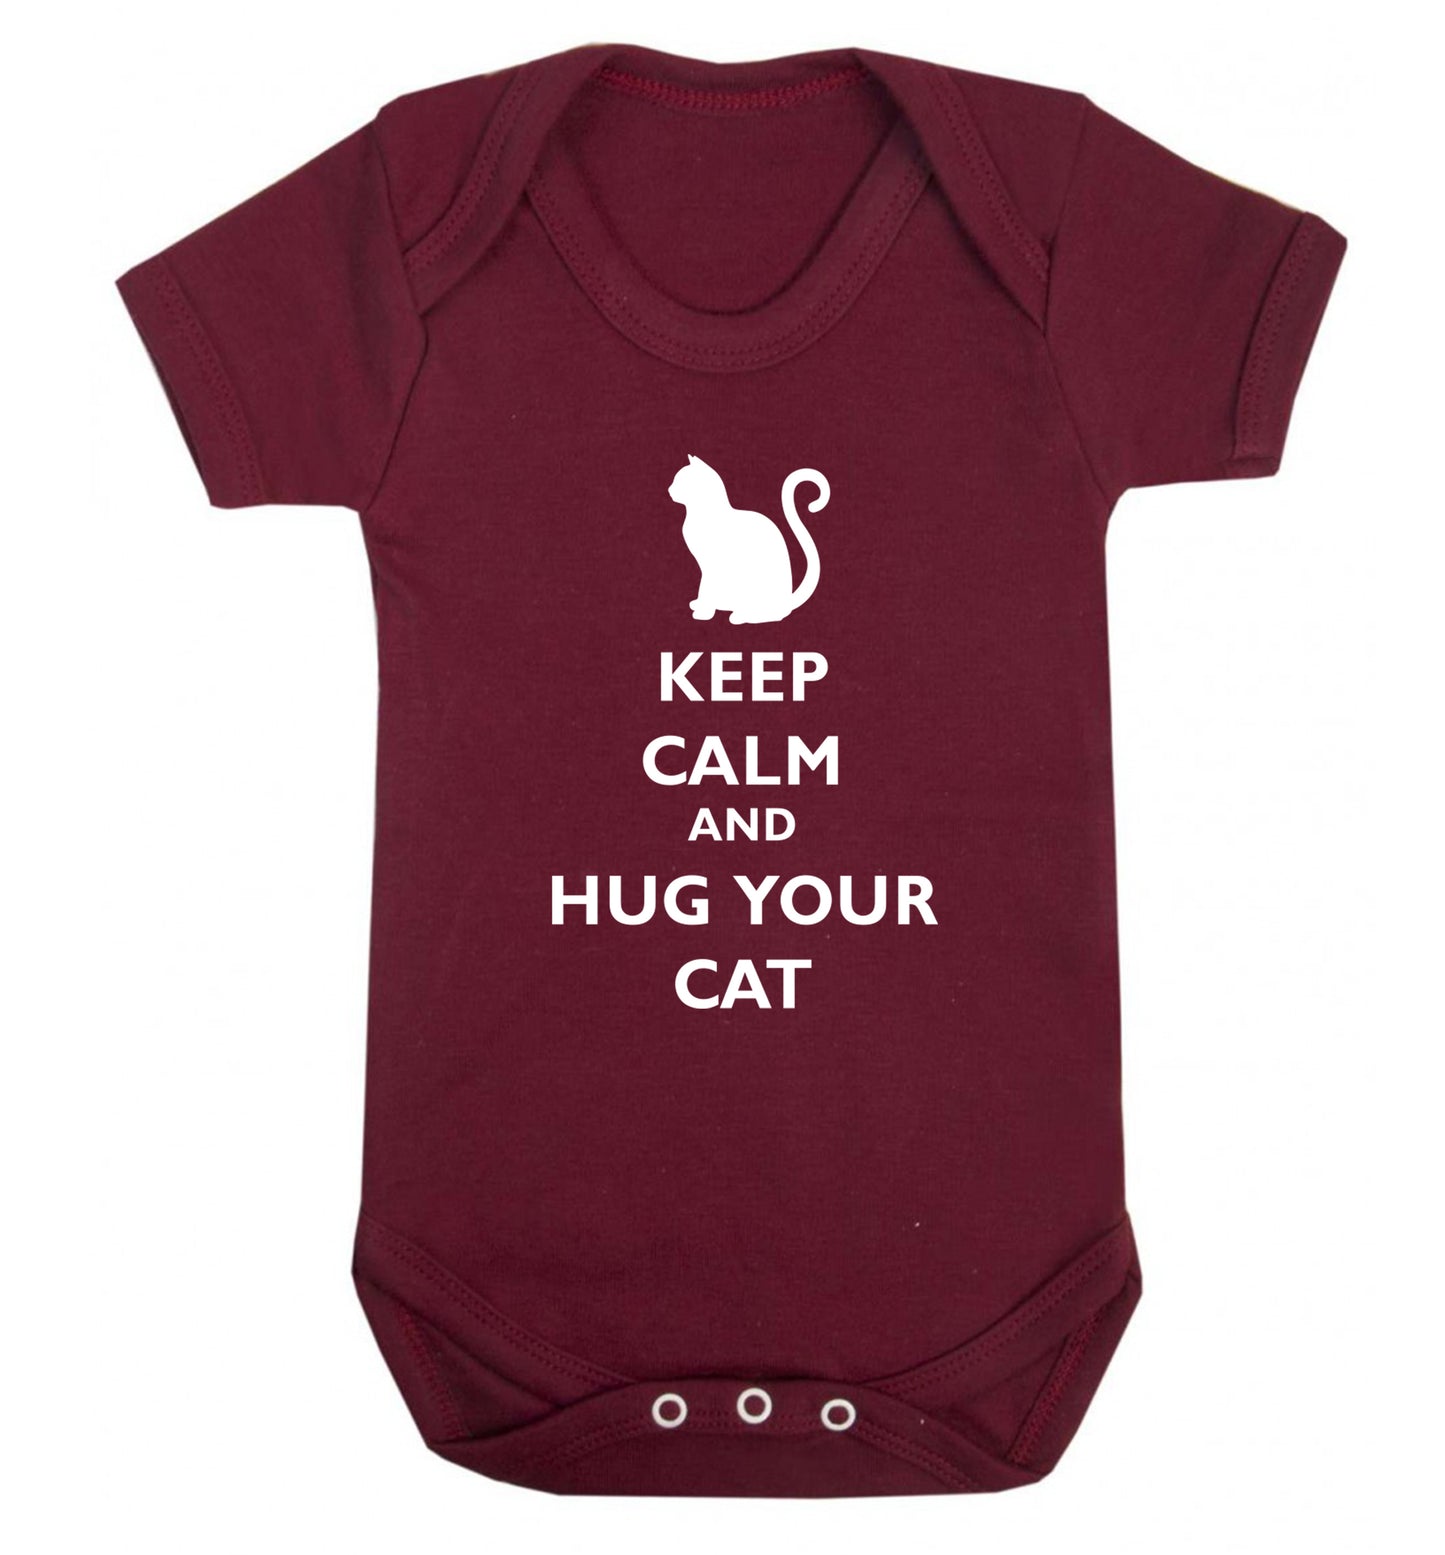 Keep calm and hug your cat Baby Vest maroon 18-24 months